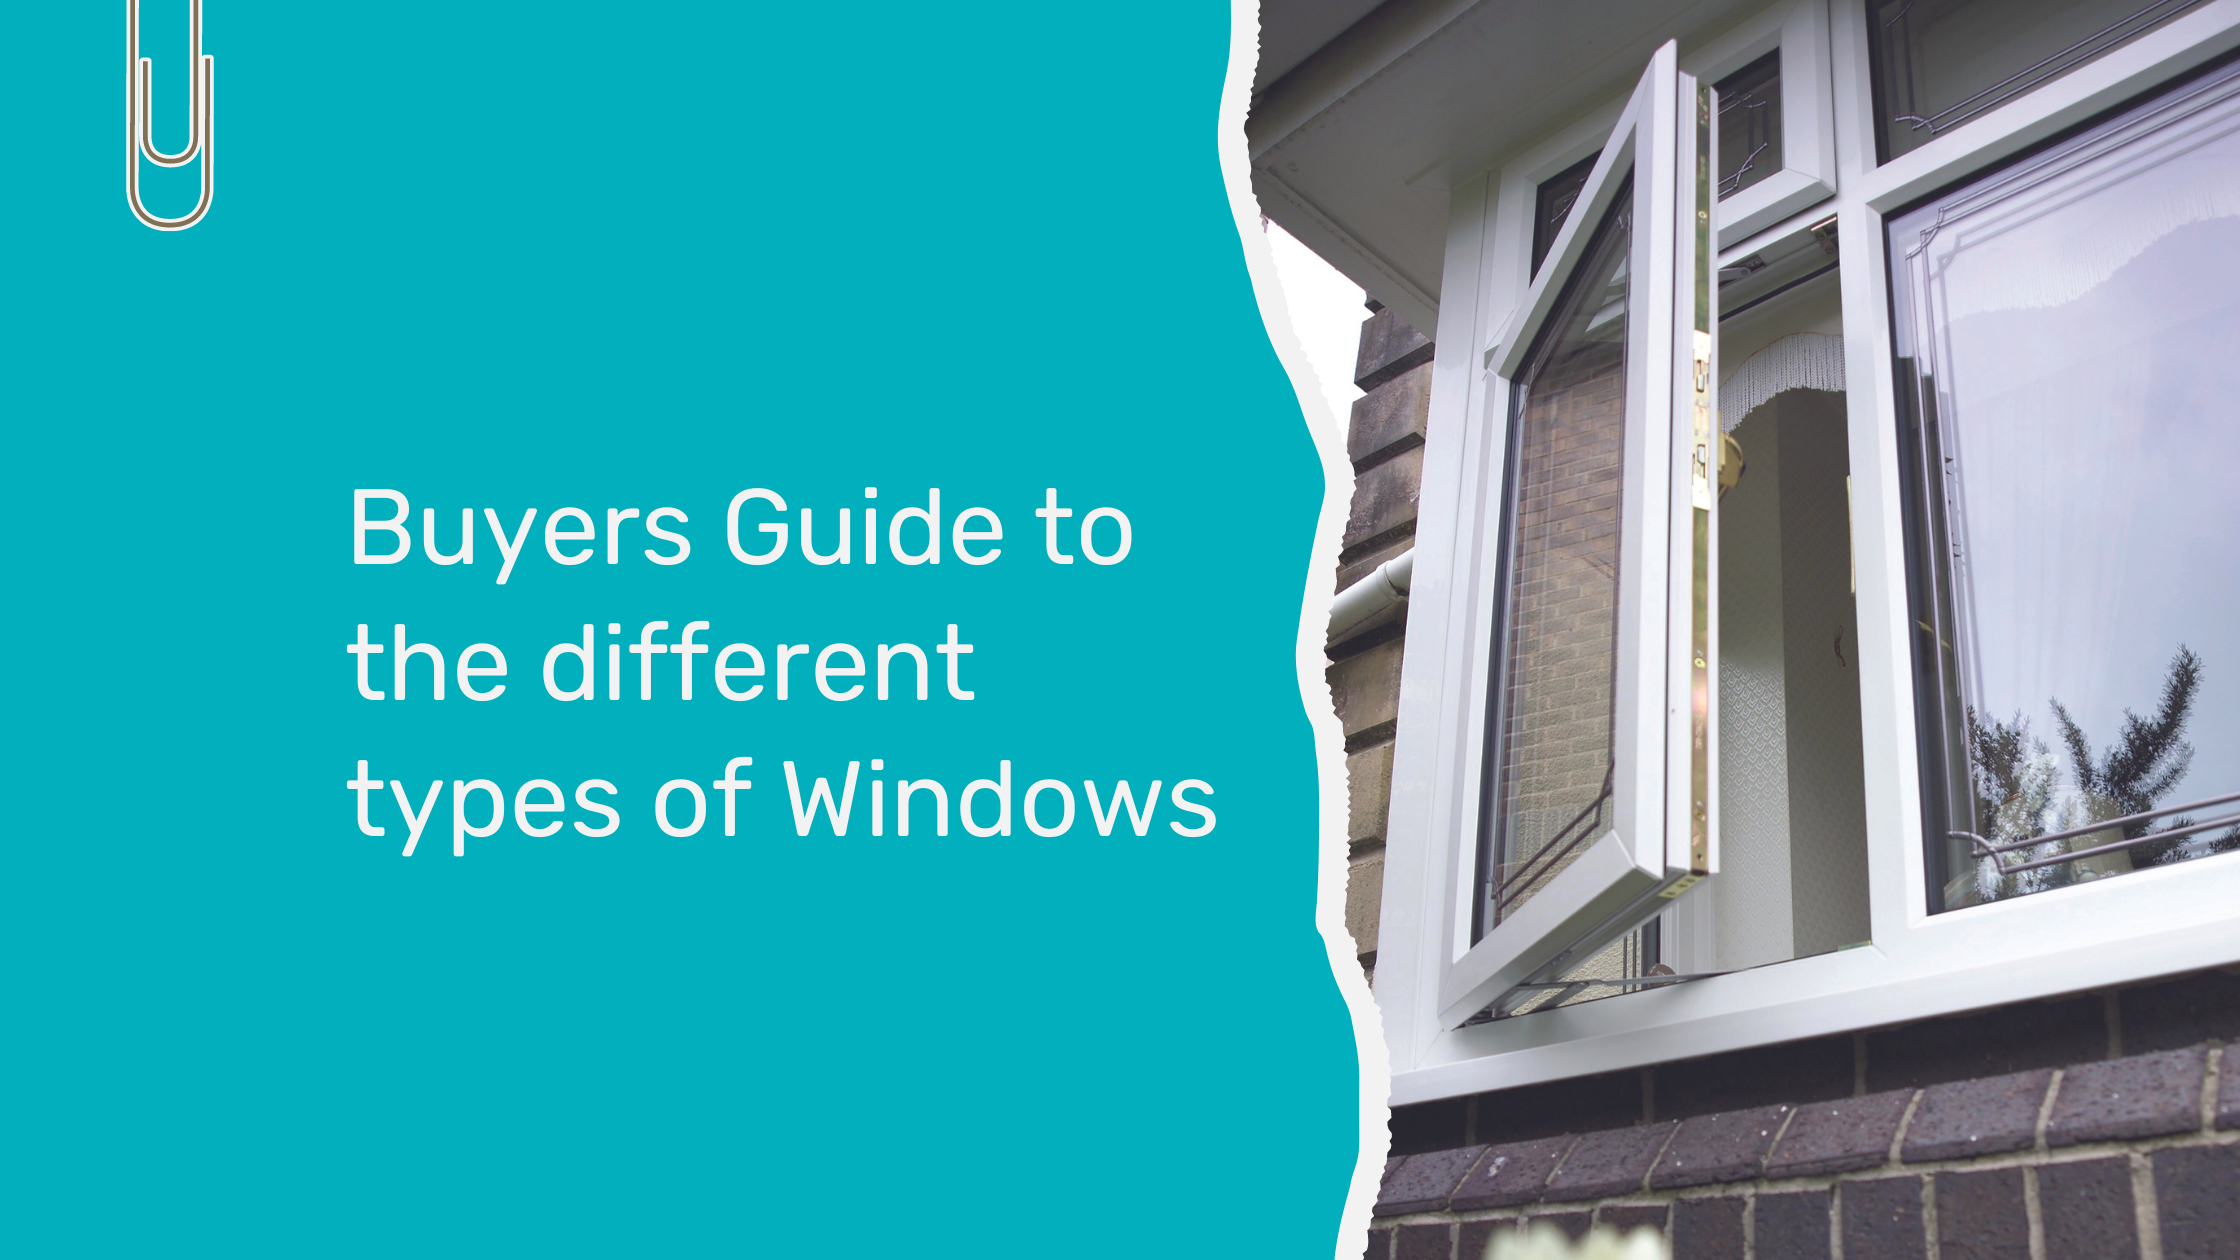 Buyers Guide to the Different Types of Windows